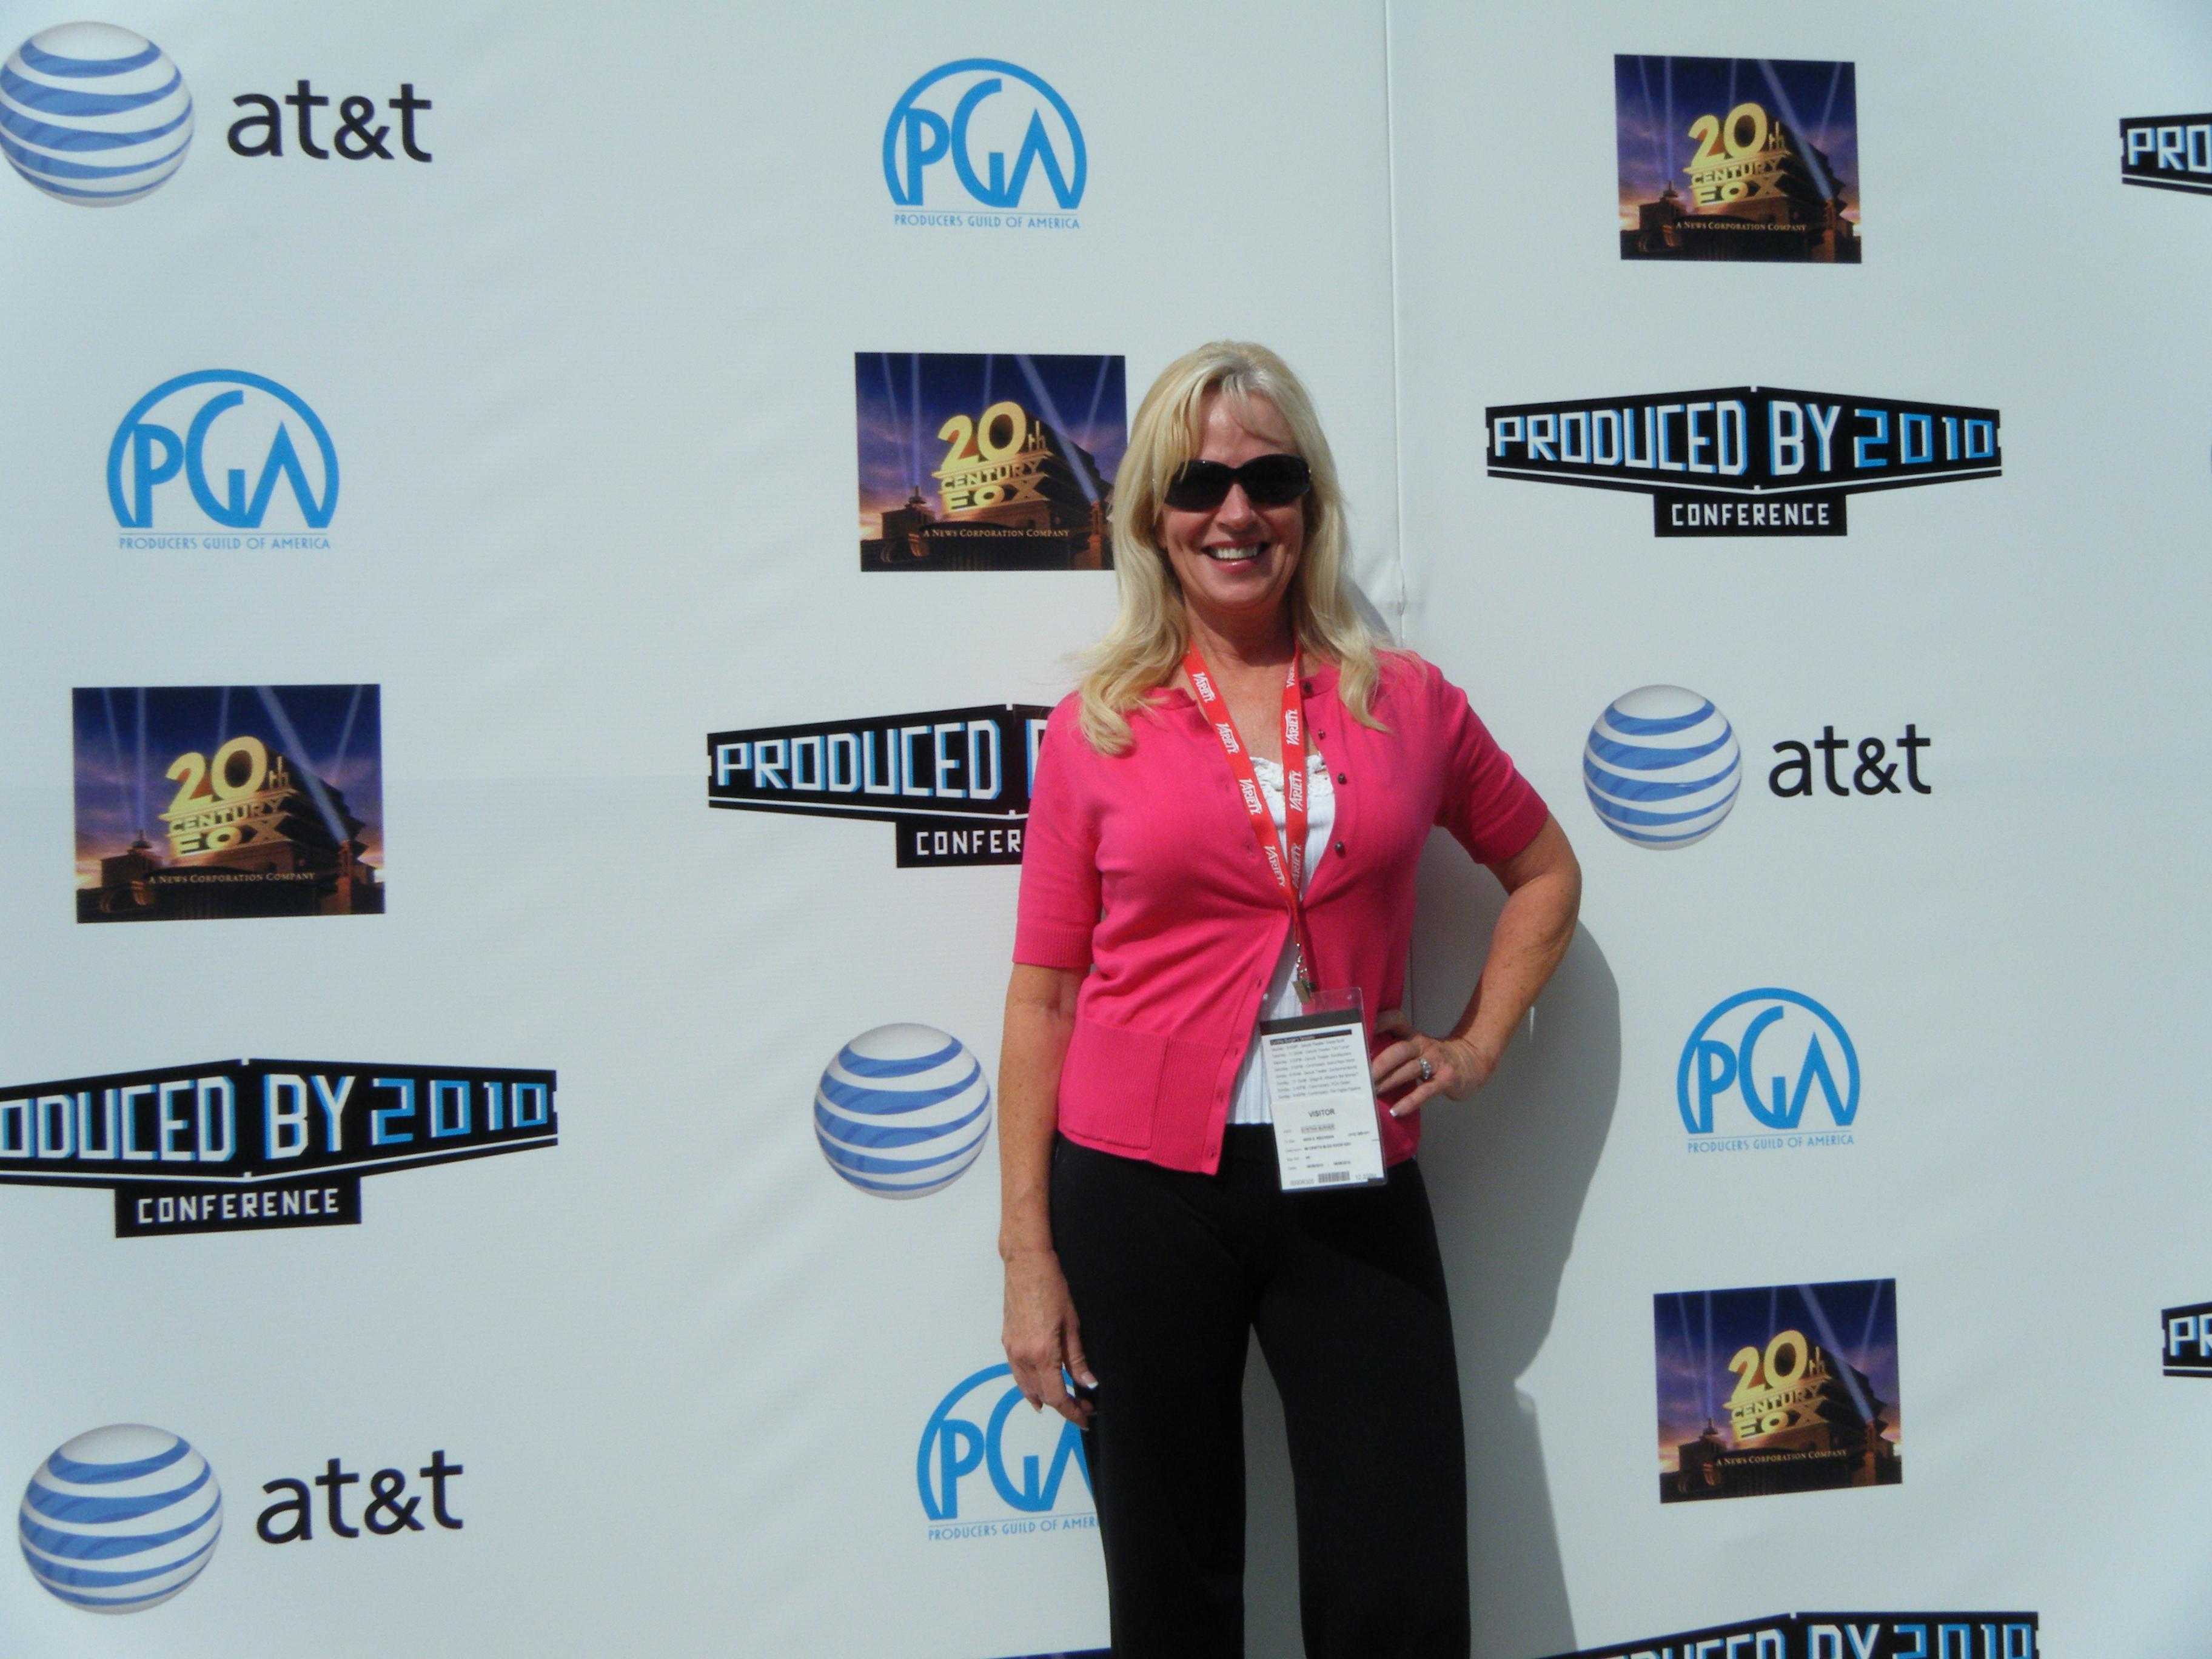 WIFE CINDY & STEVE AT A PRODUCERS GUILD EVENT